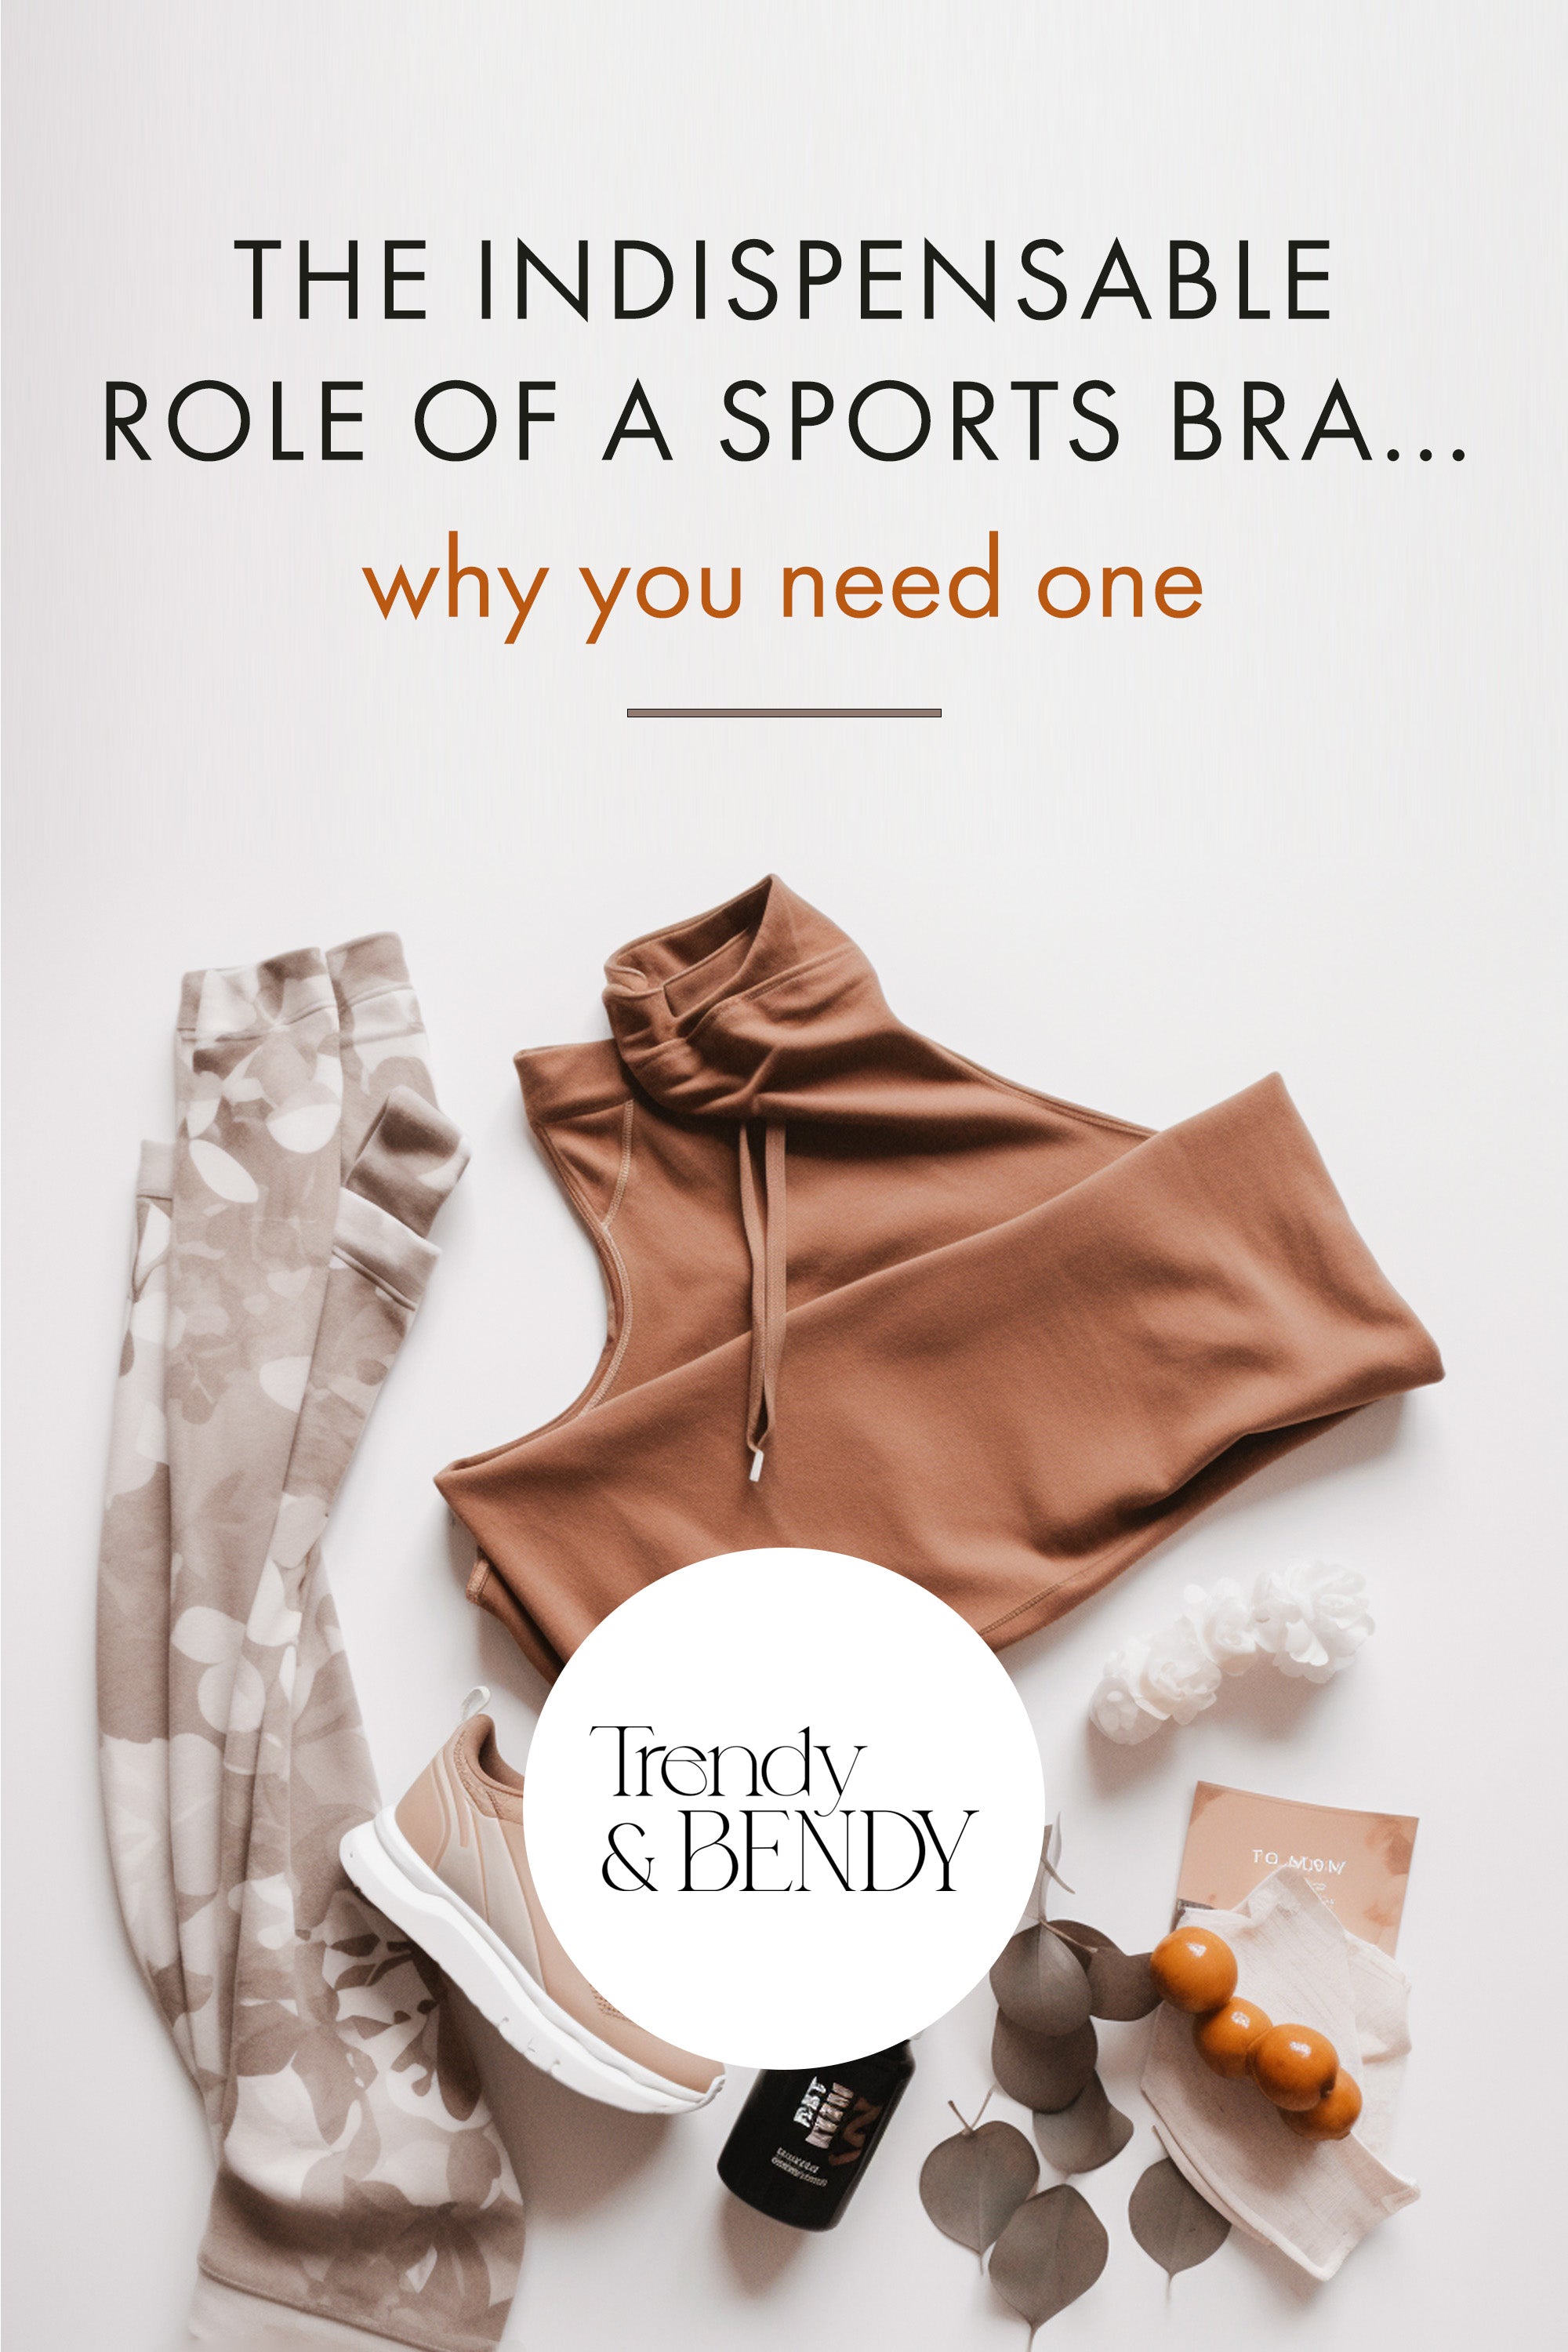 Why you need a sports bra